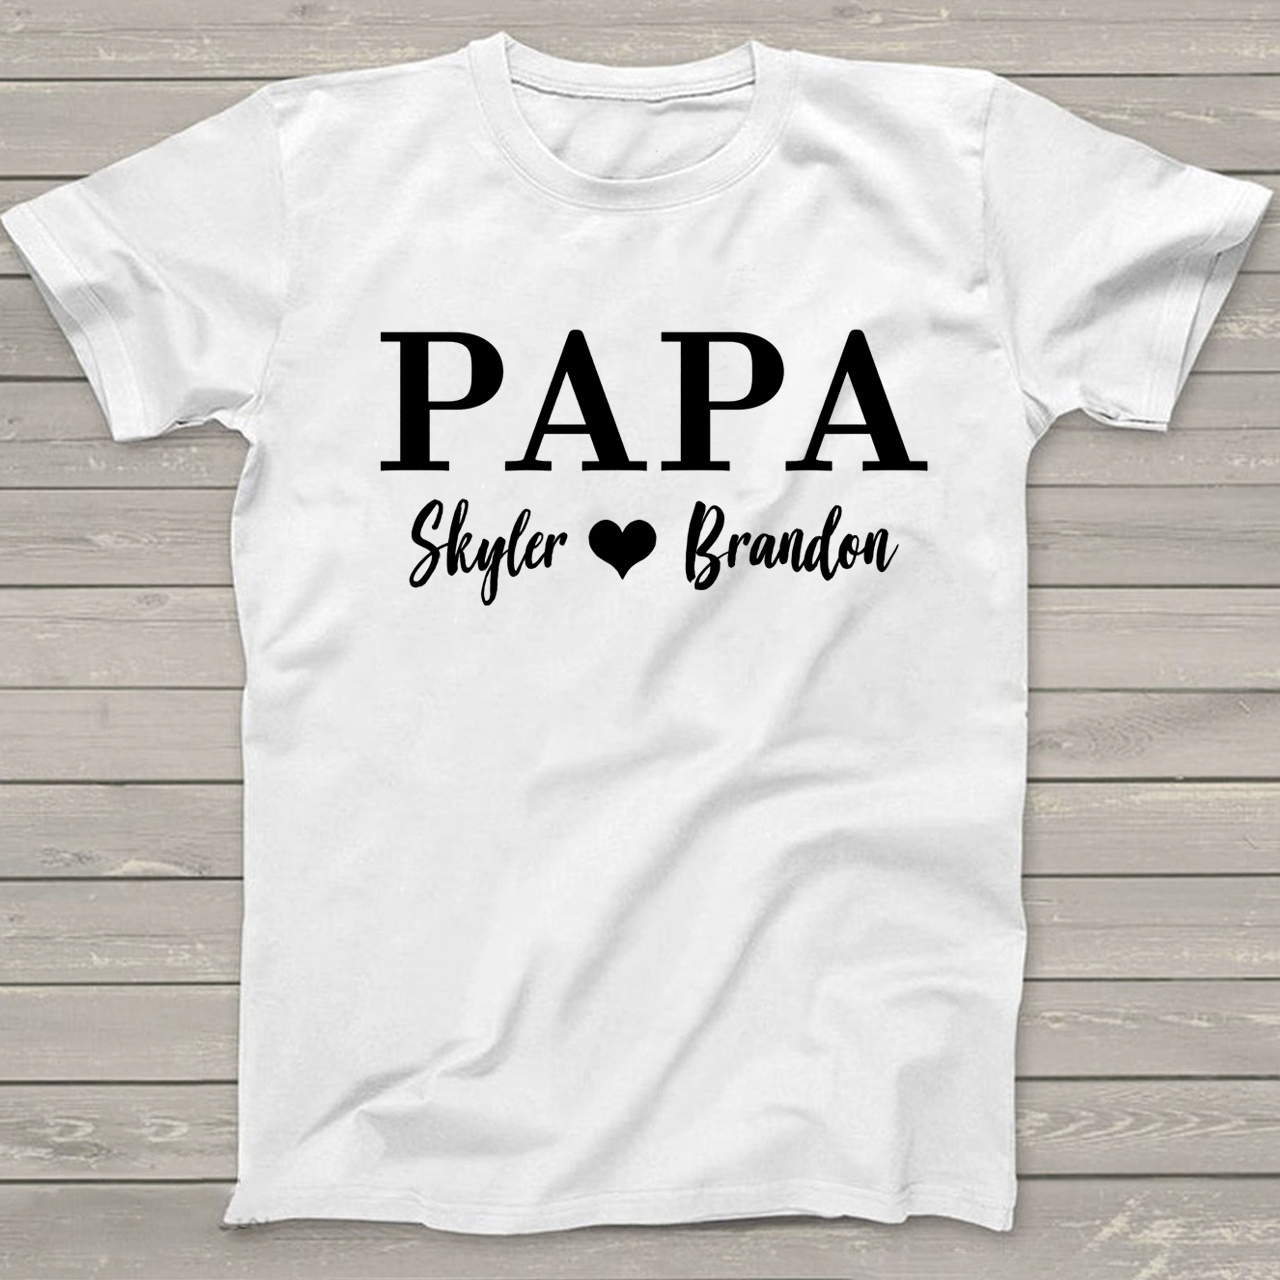 Personalized PAPA T-shirt With Names